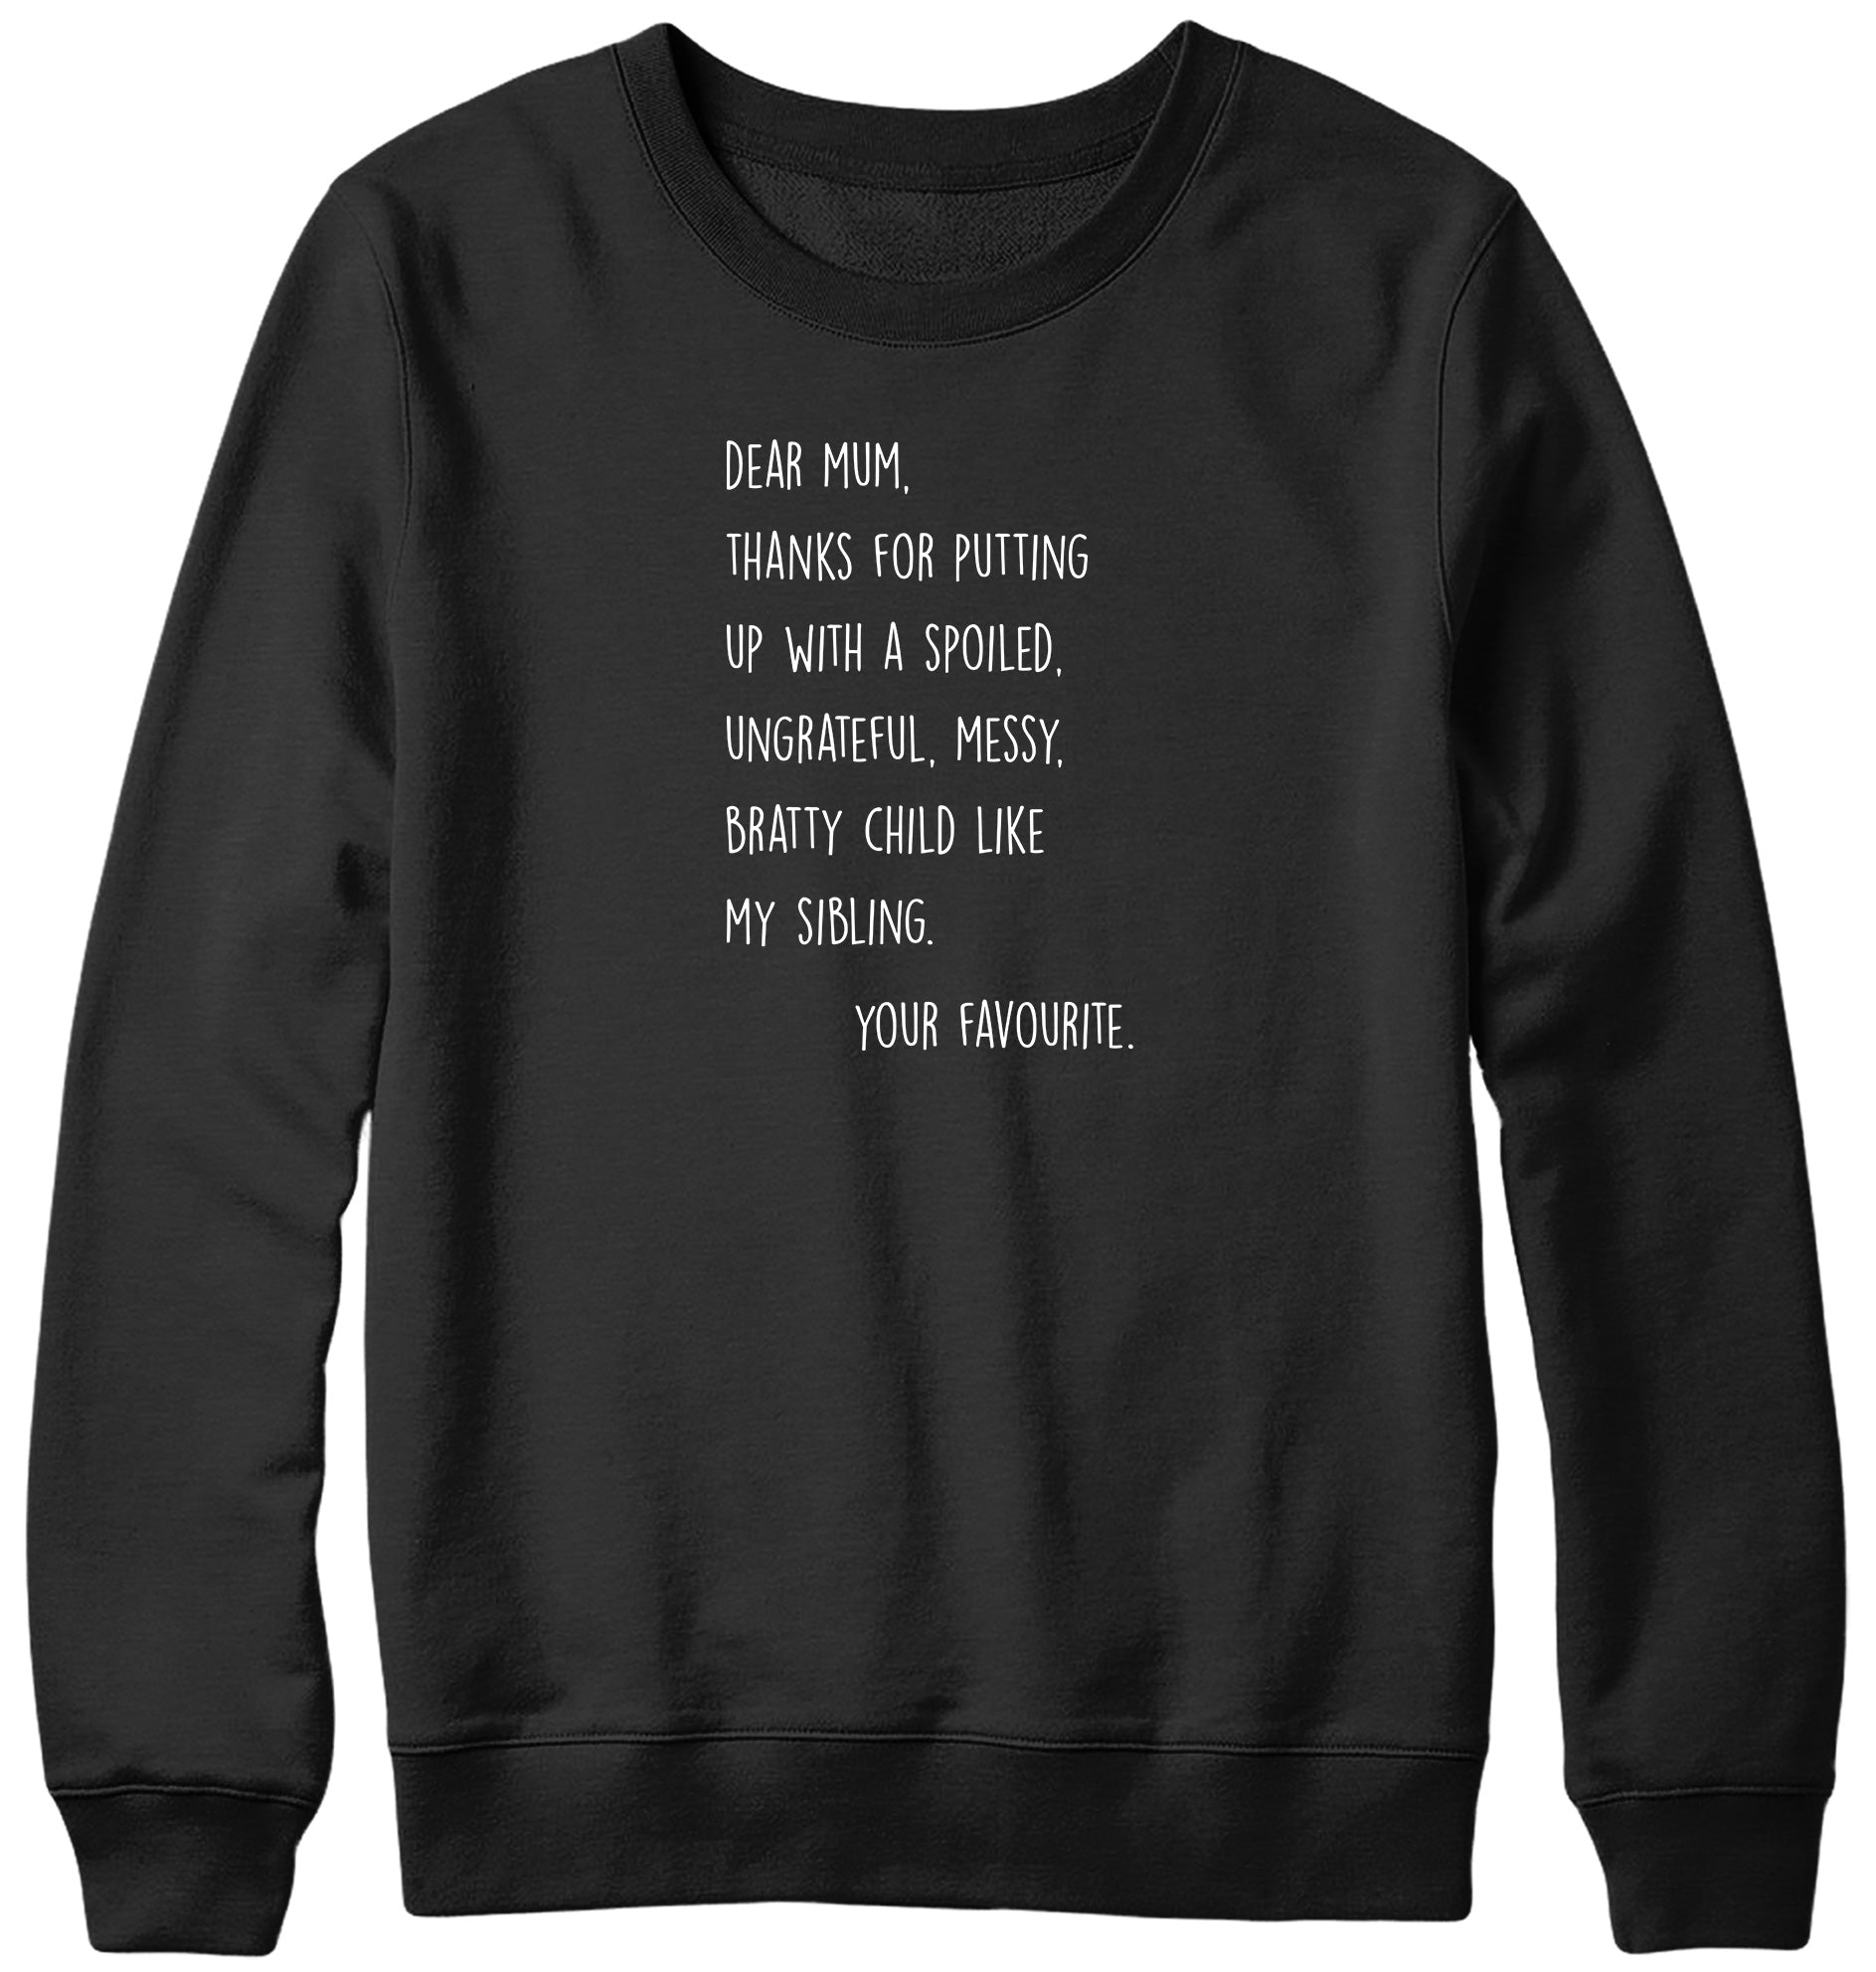 DEAR MUM  THANKS FOR PUTTING UP WITH A SPOILED BRATTY CHILD MENS LADIES WOMENS UNISEX SWEATSHIRT SWEATER